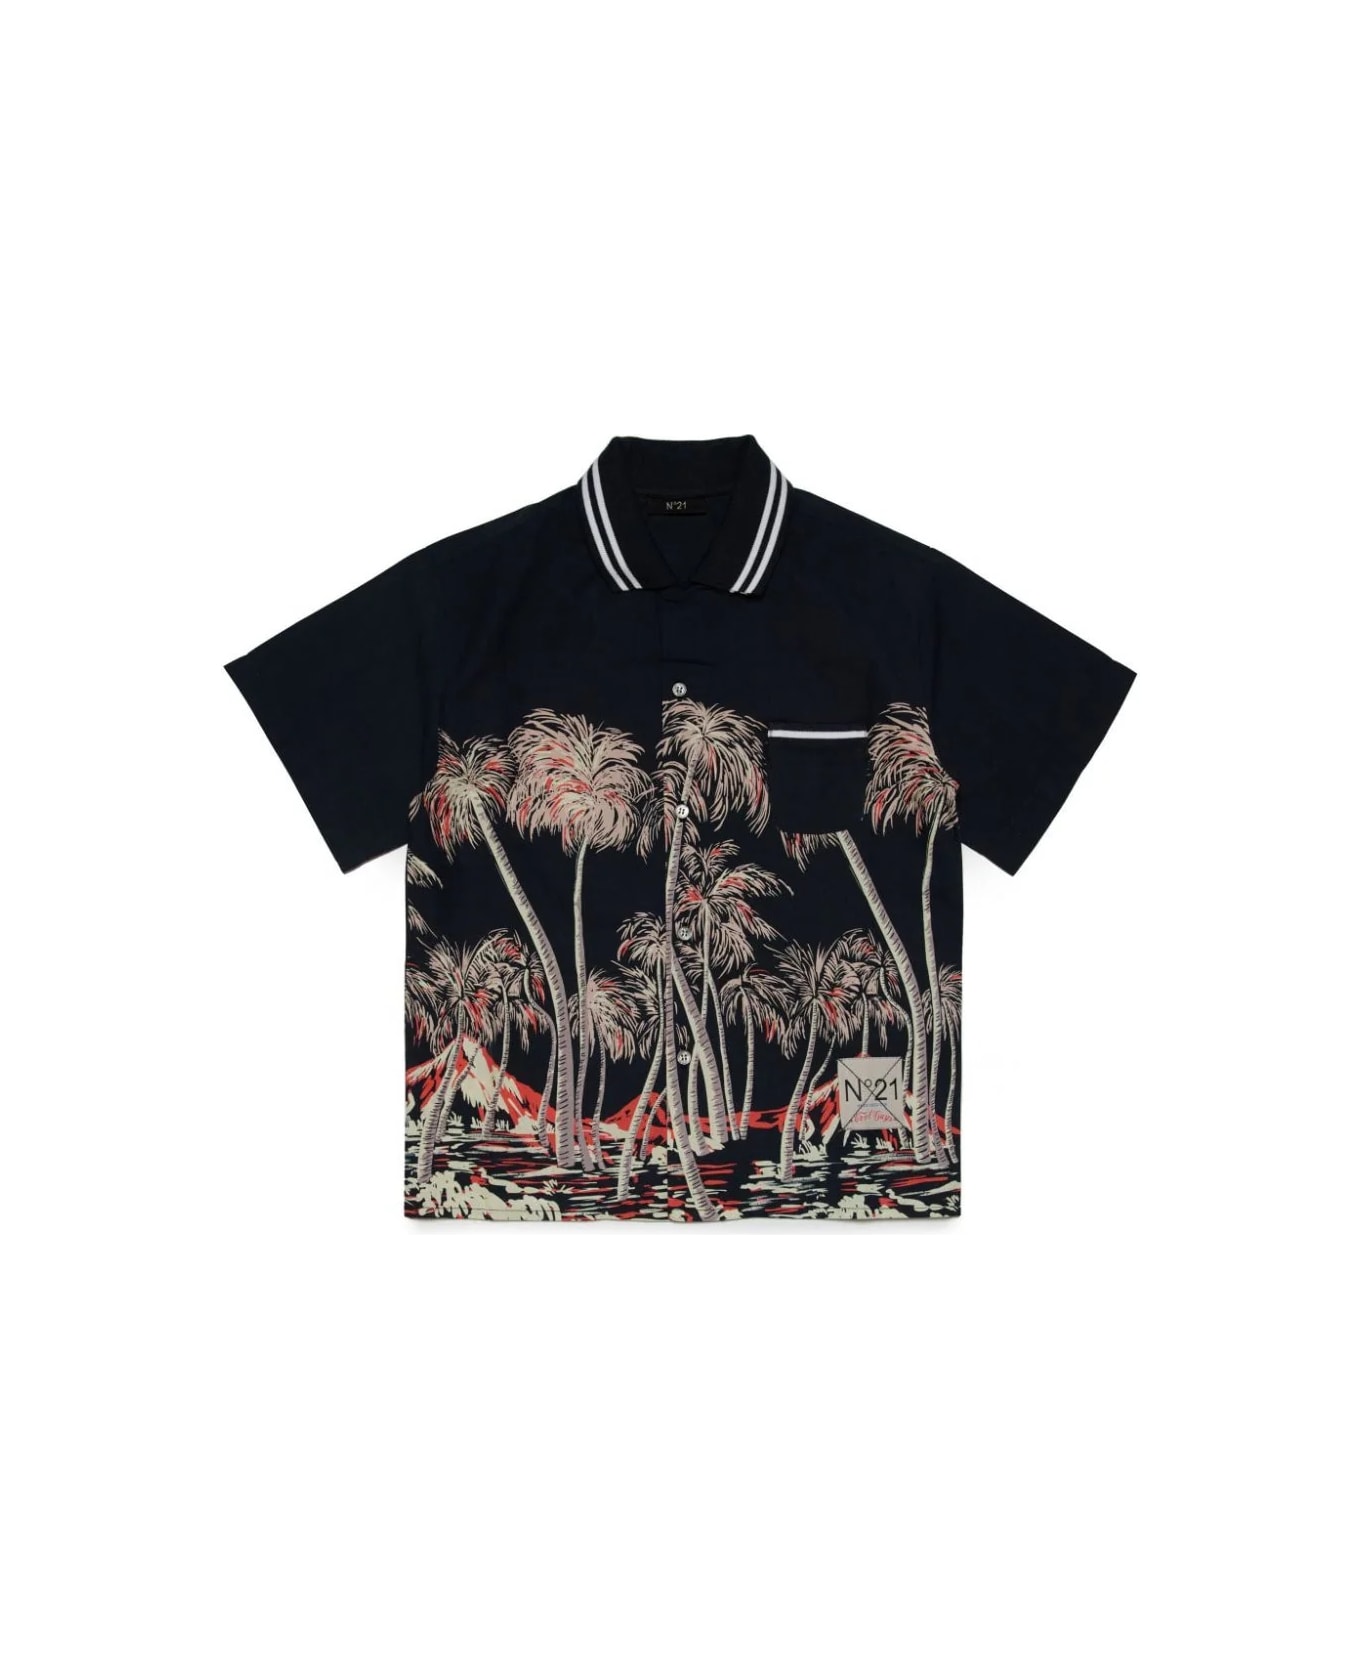 N.21 Polo Con Stampa Grafica - Black アクセサリー＆ギフト